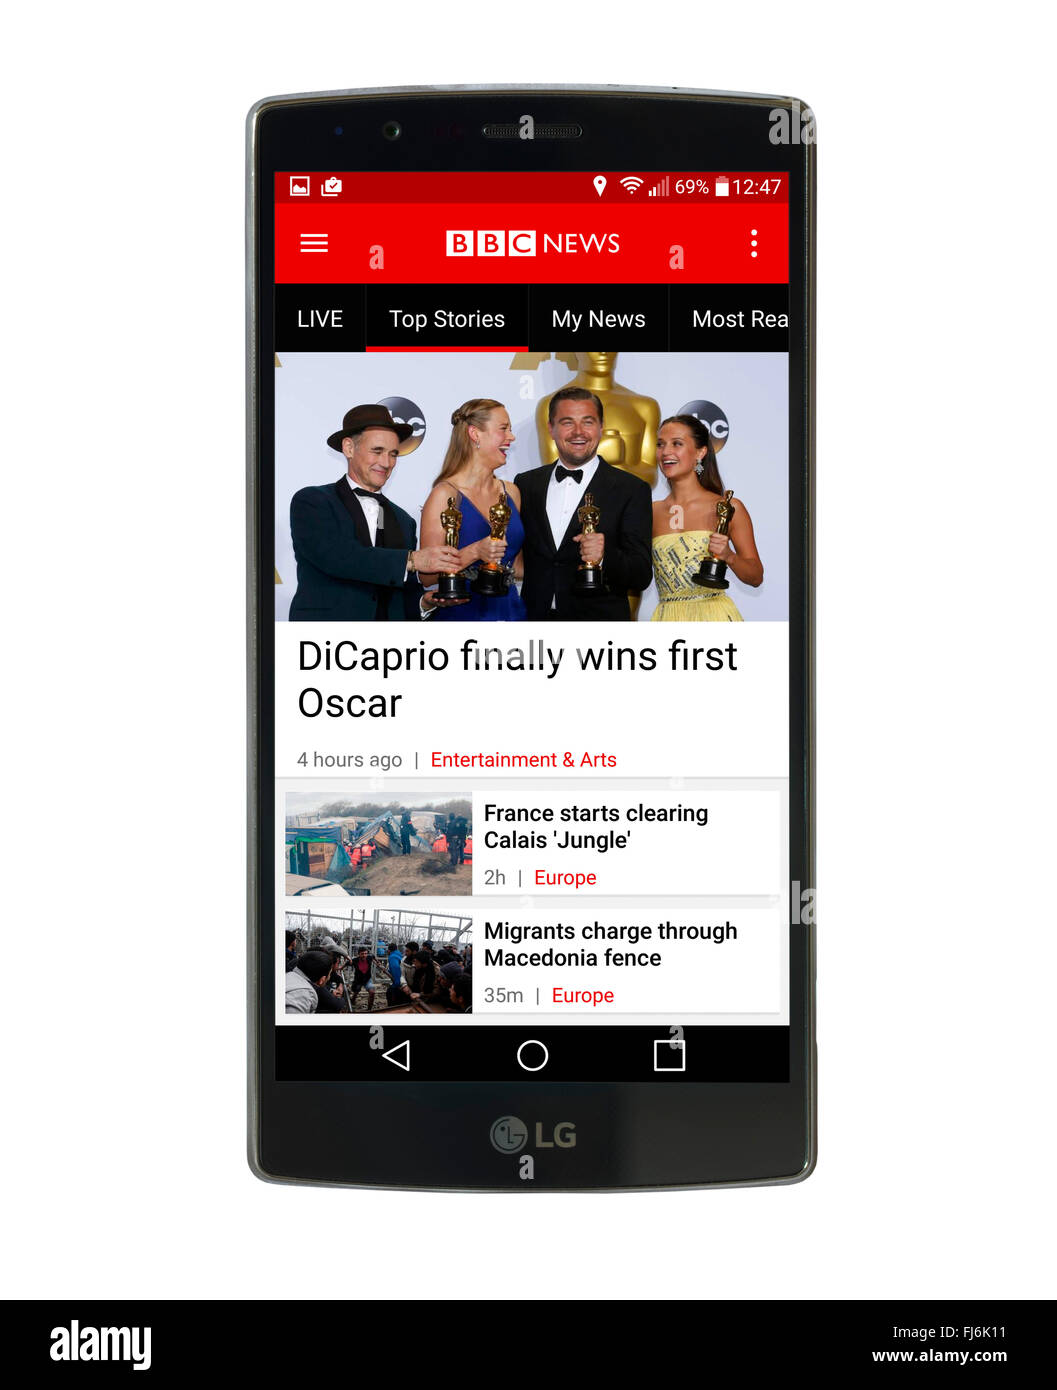 BBC News App on an LG G4 5.5 inch Android smartphone Stock Photo